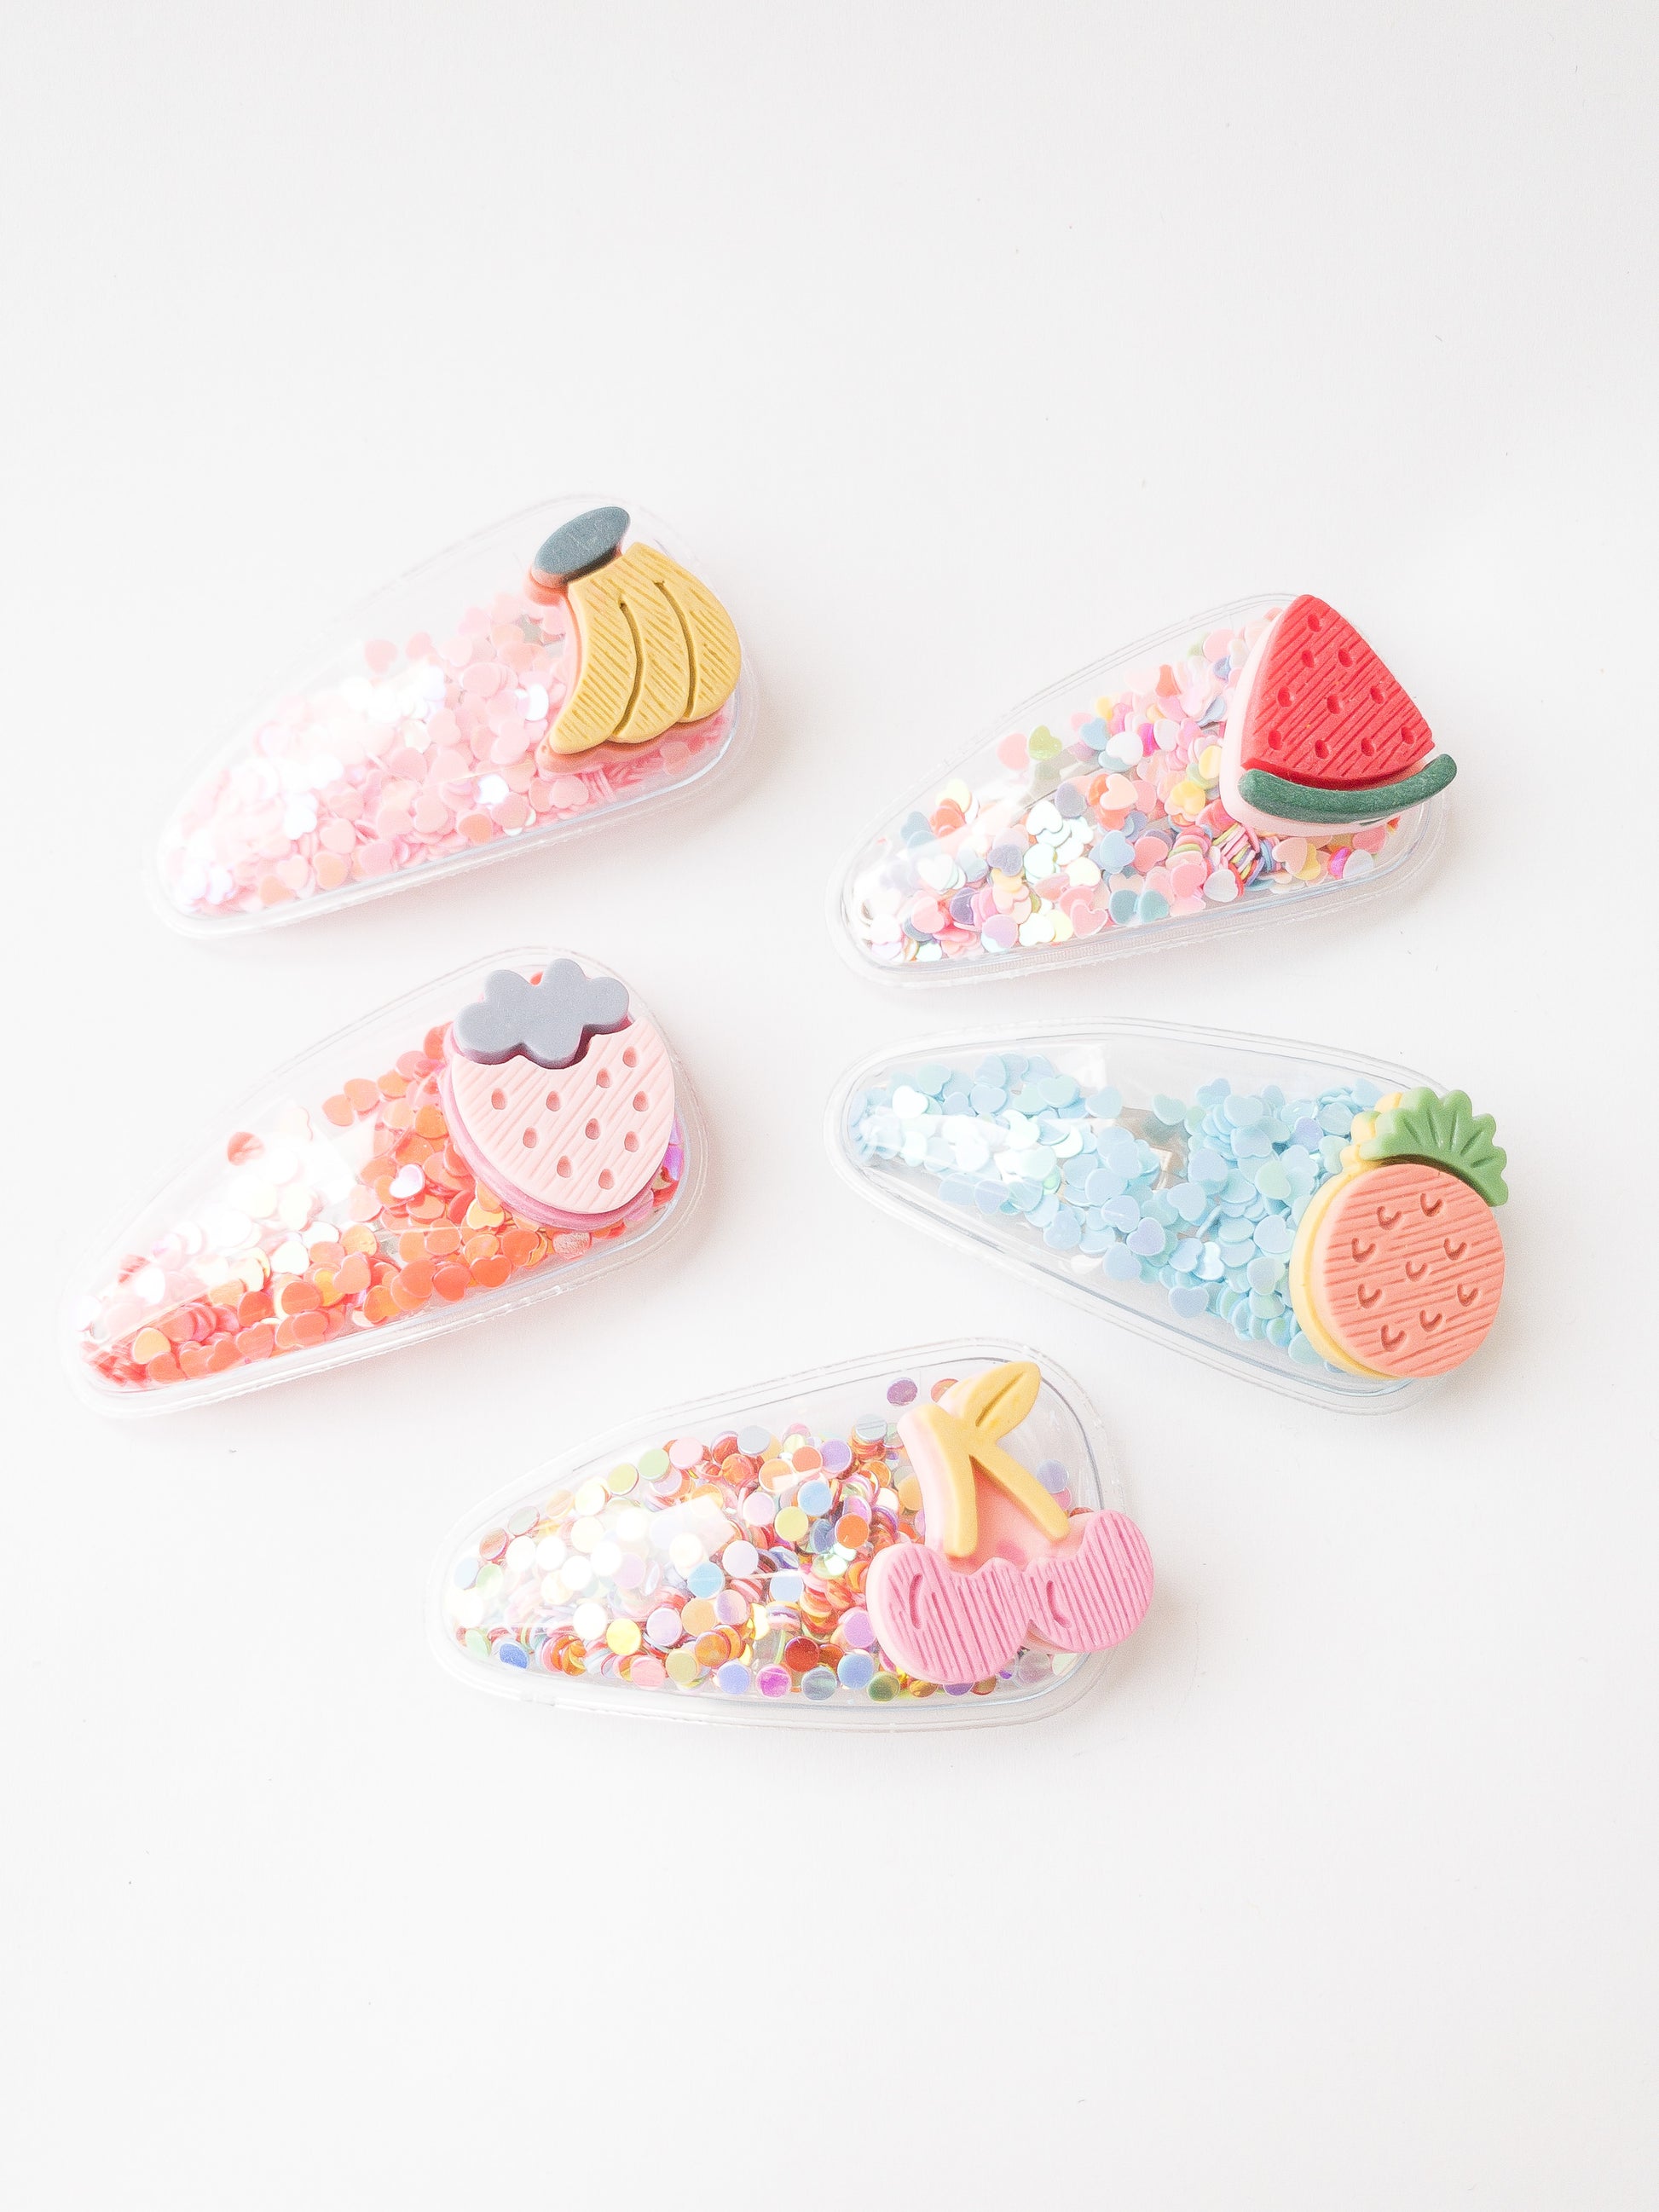 Our love of fruit continues with these transparent shaker clips filled with colorful confetti and a slice of fruit affixed to each. So fun to shake and snap on and off! This set has a banana, watermelon, strawberry, pineapple, and cherry.